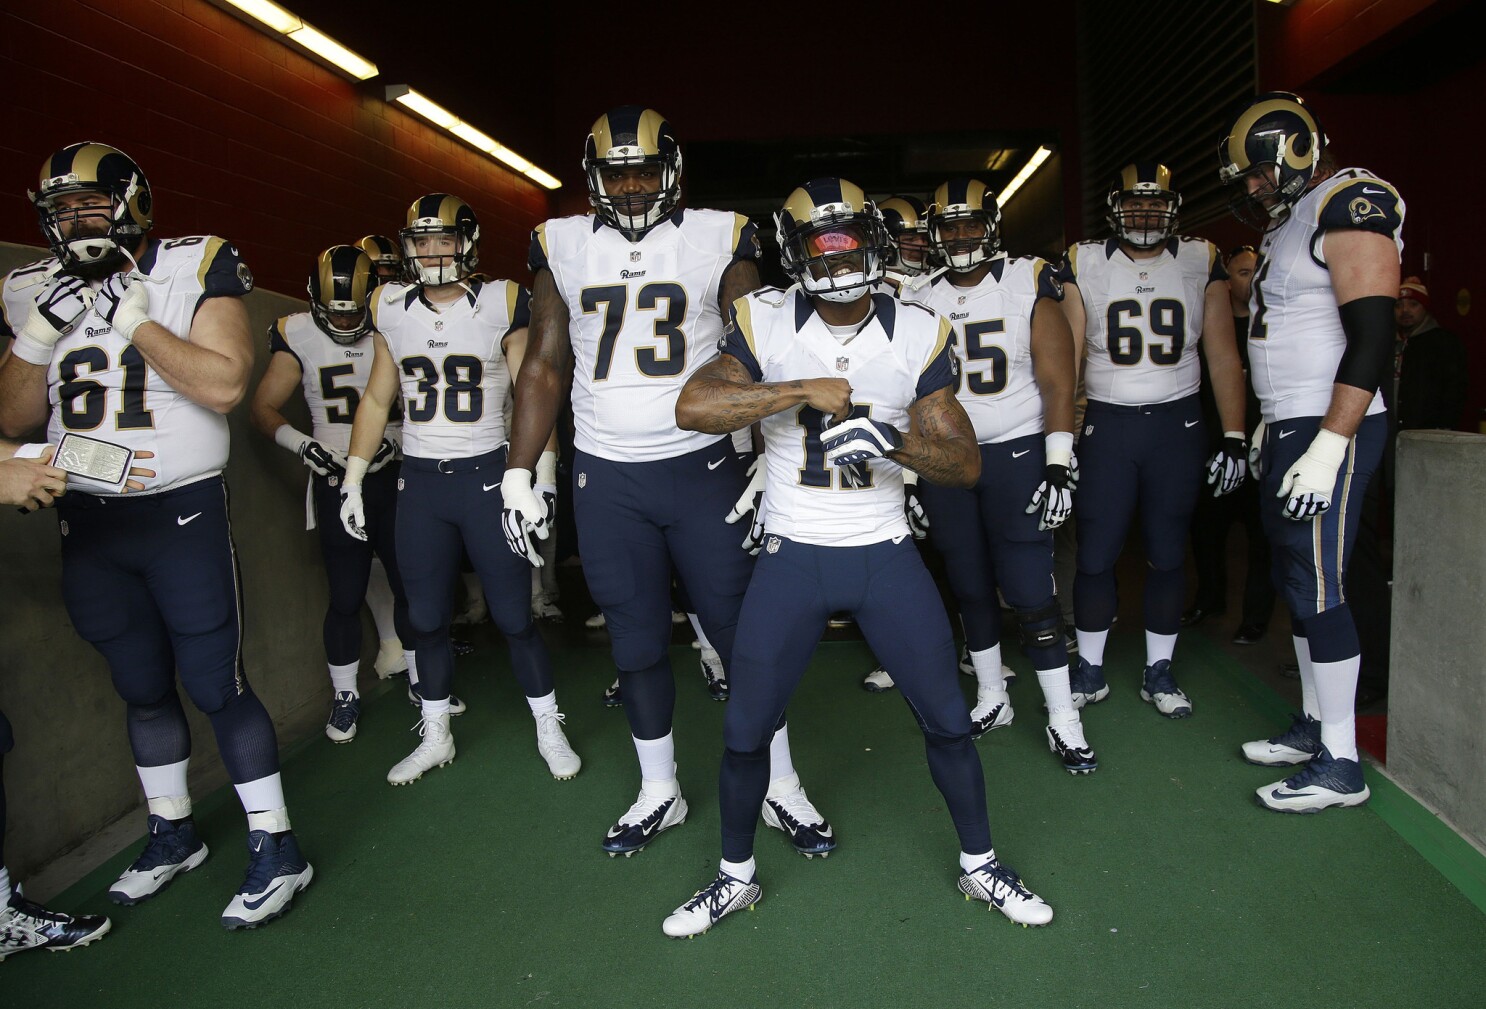 L.A. Rams plan to keep current uniforms until 2019 - Los Angeles Times